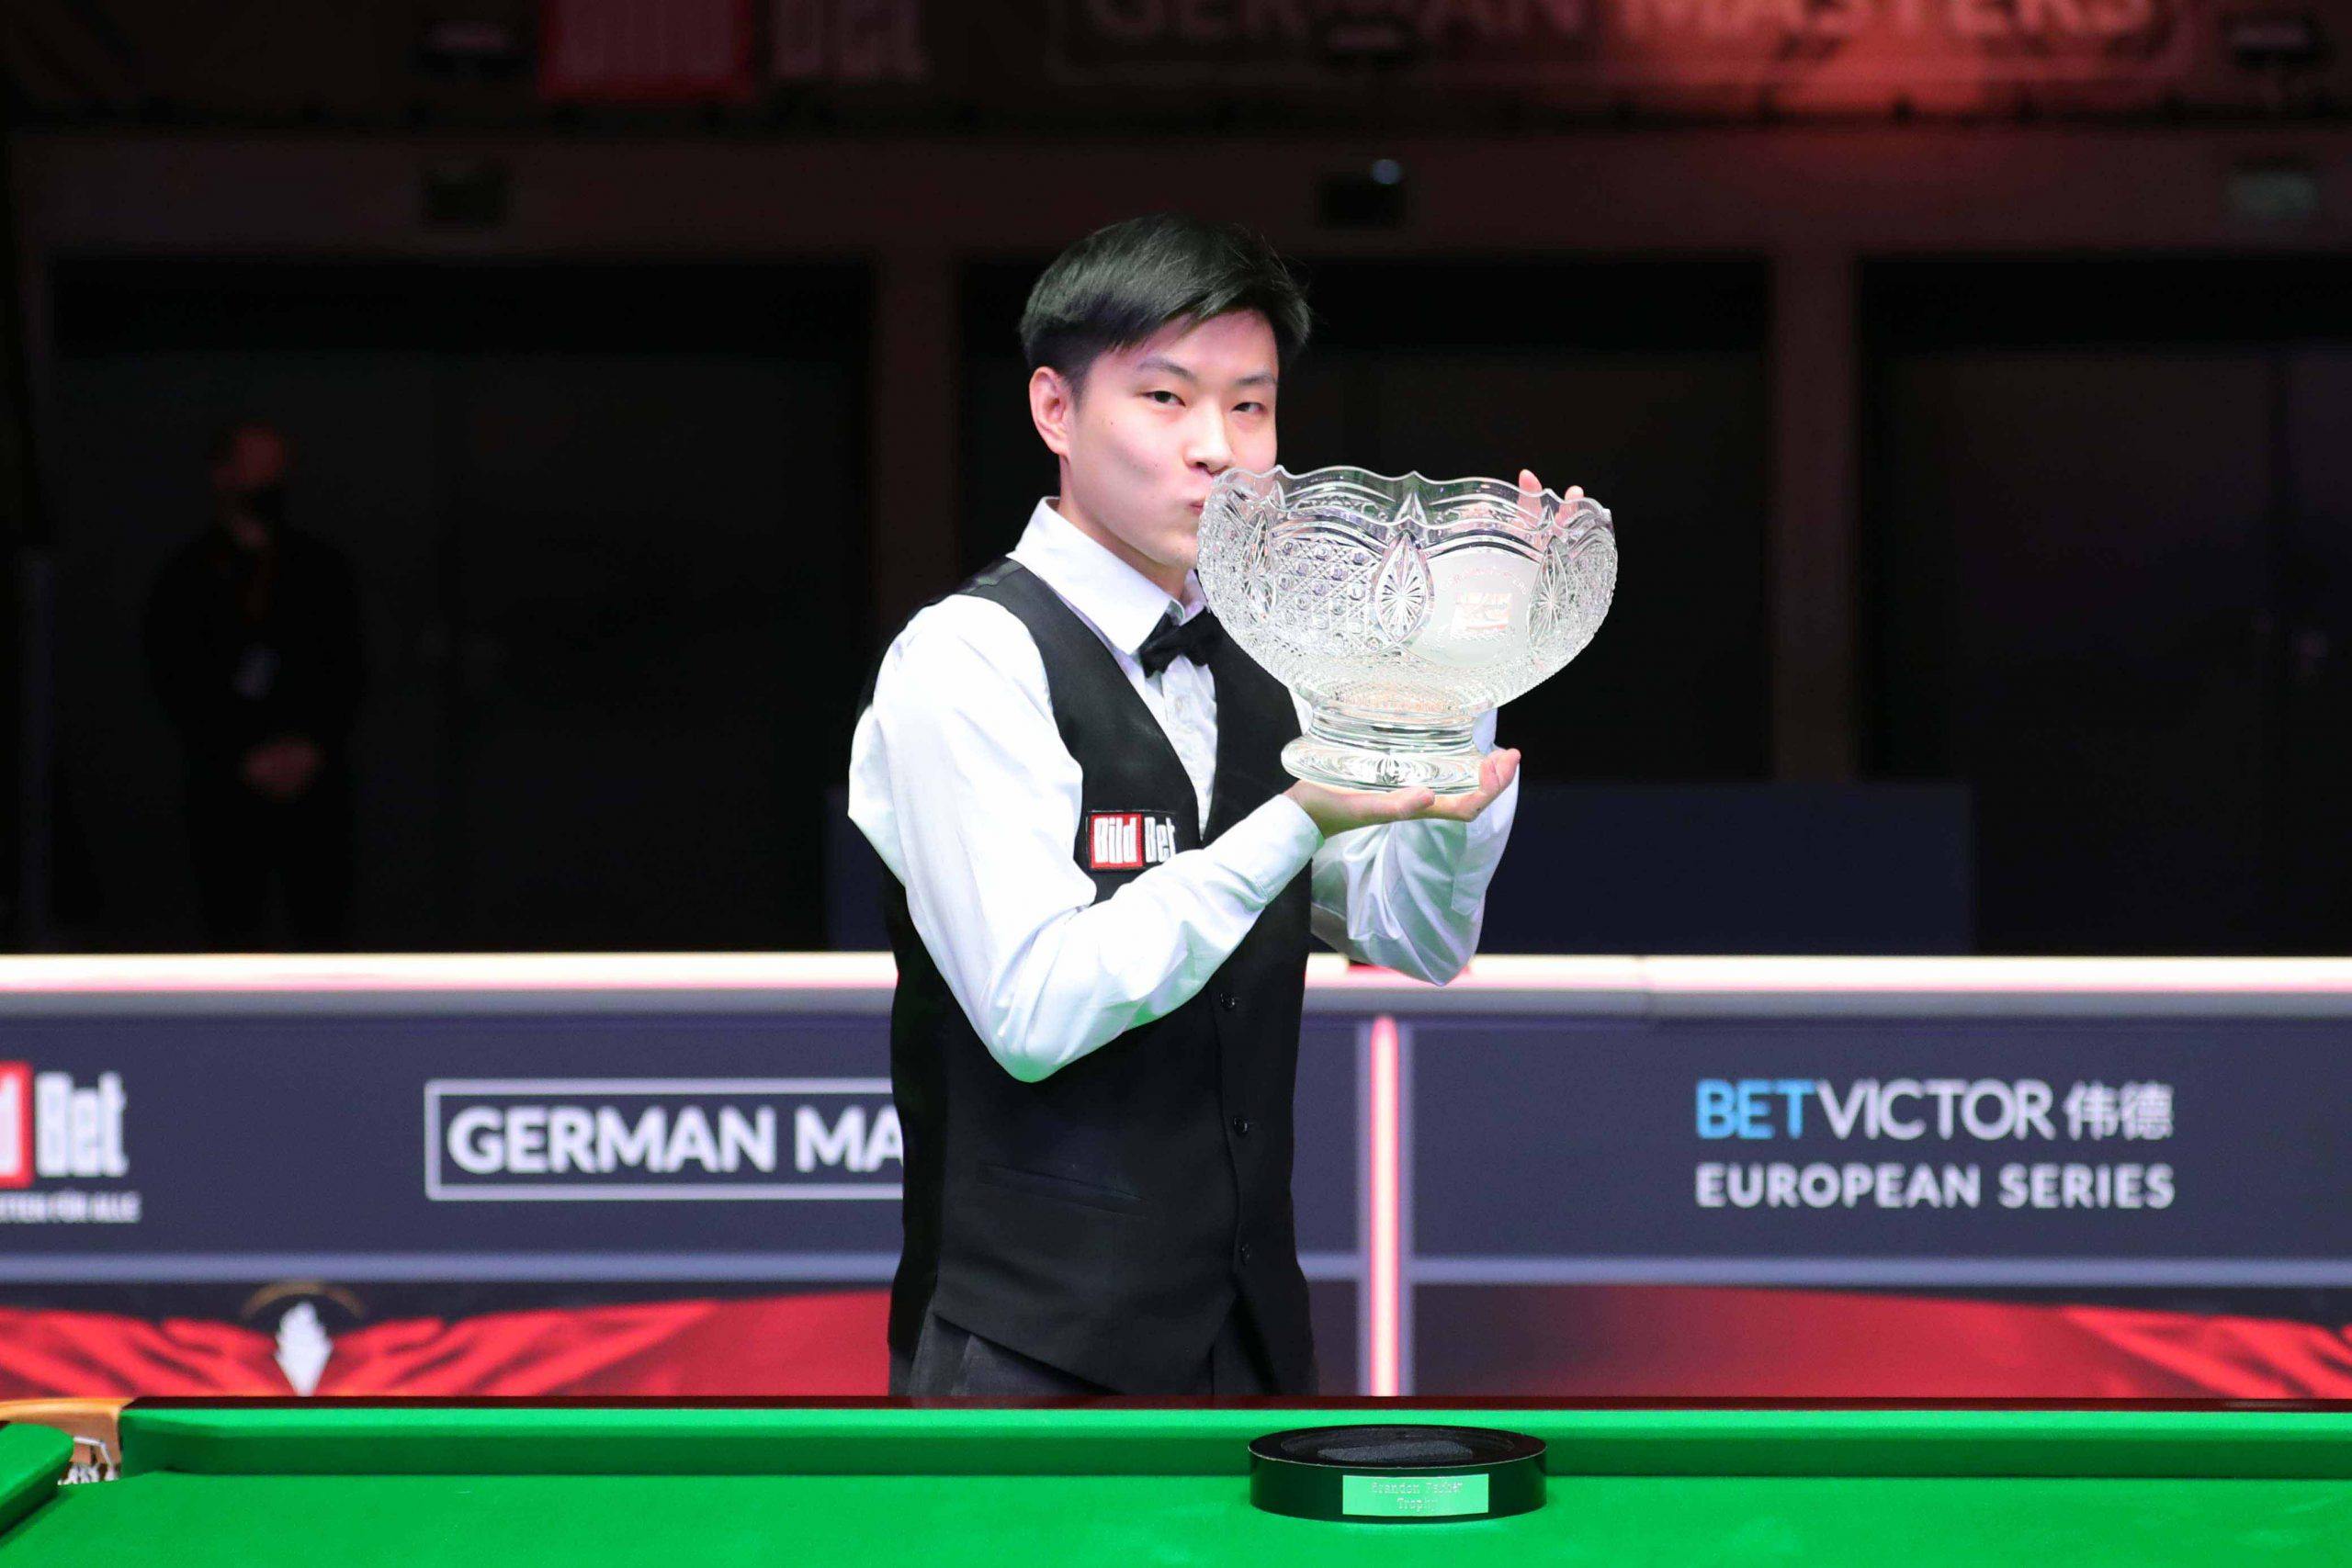 Snooker ace Zhao Xintong signals new phase of Chinese domination after crushing compatriot Yan Bingtao in German Masters final South China Morning Post